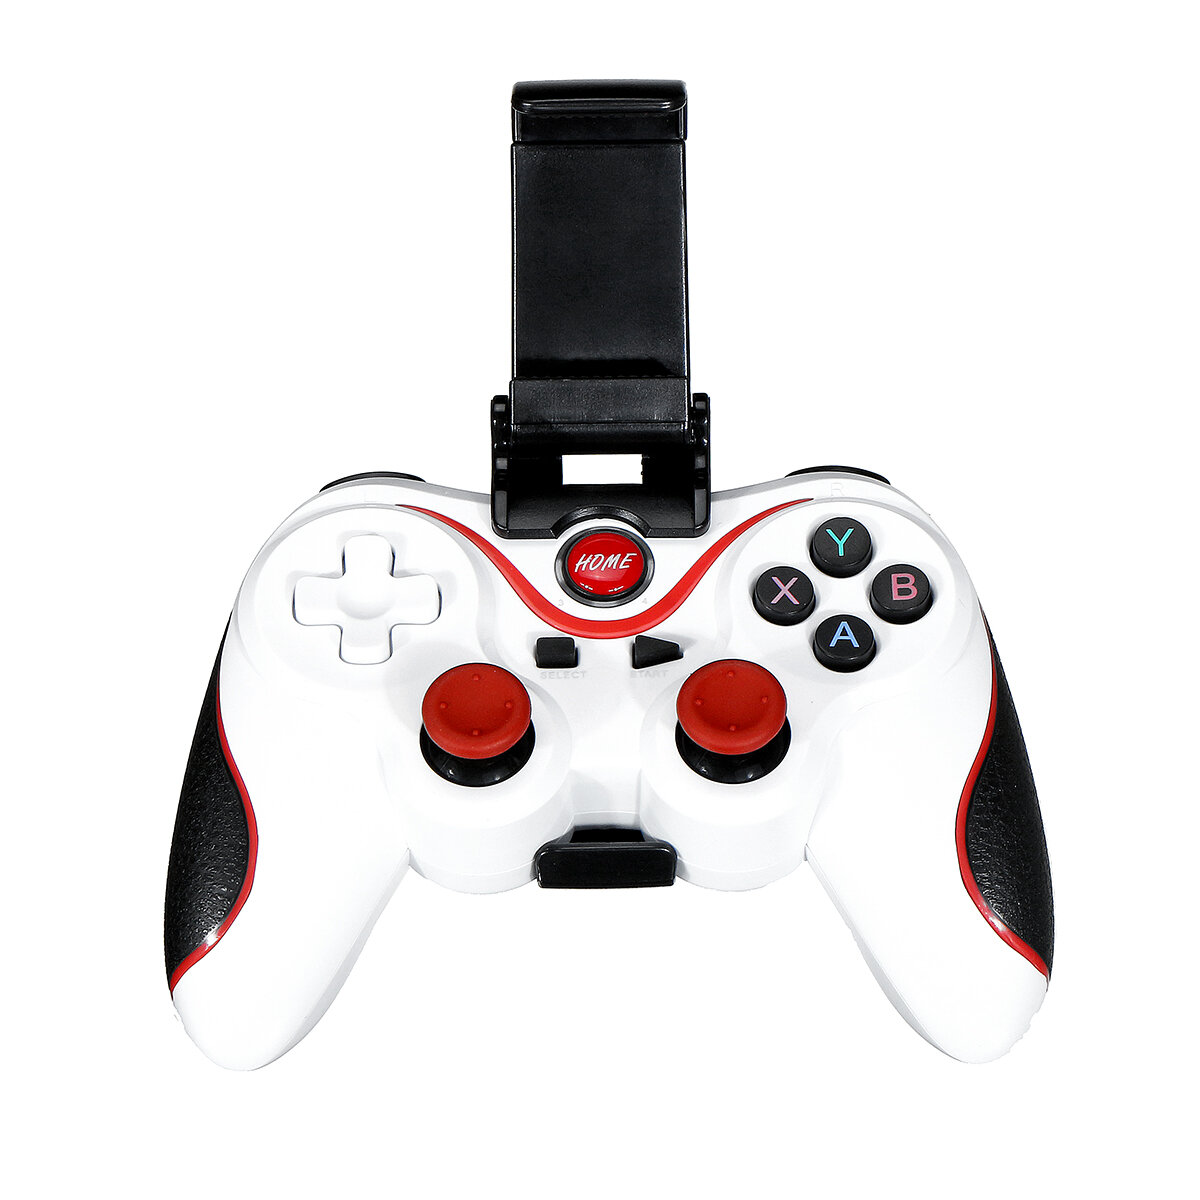 Wireless Bluetooth Gamepad Gaming Controller For Android Smartphone Tablet Pc Sale Banggood Com